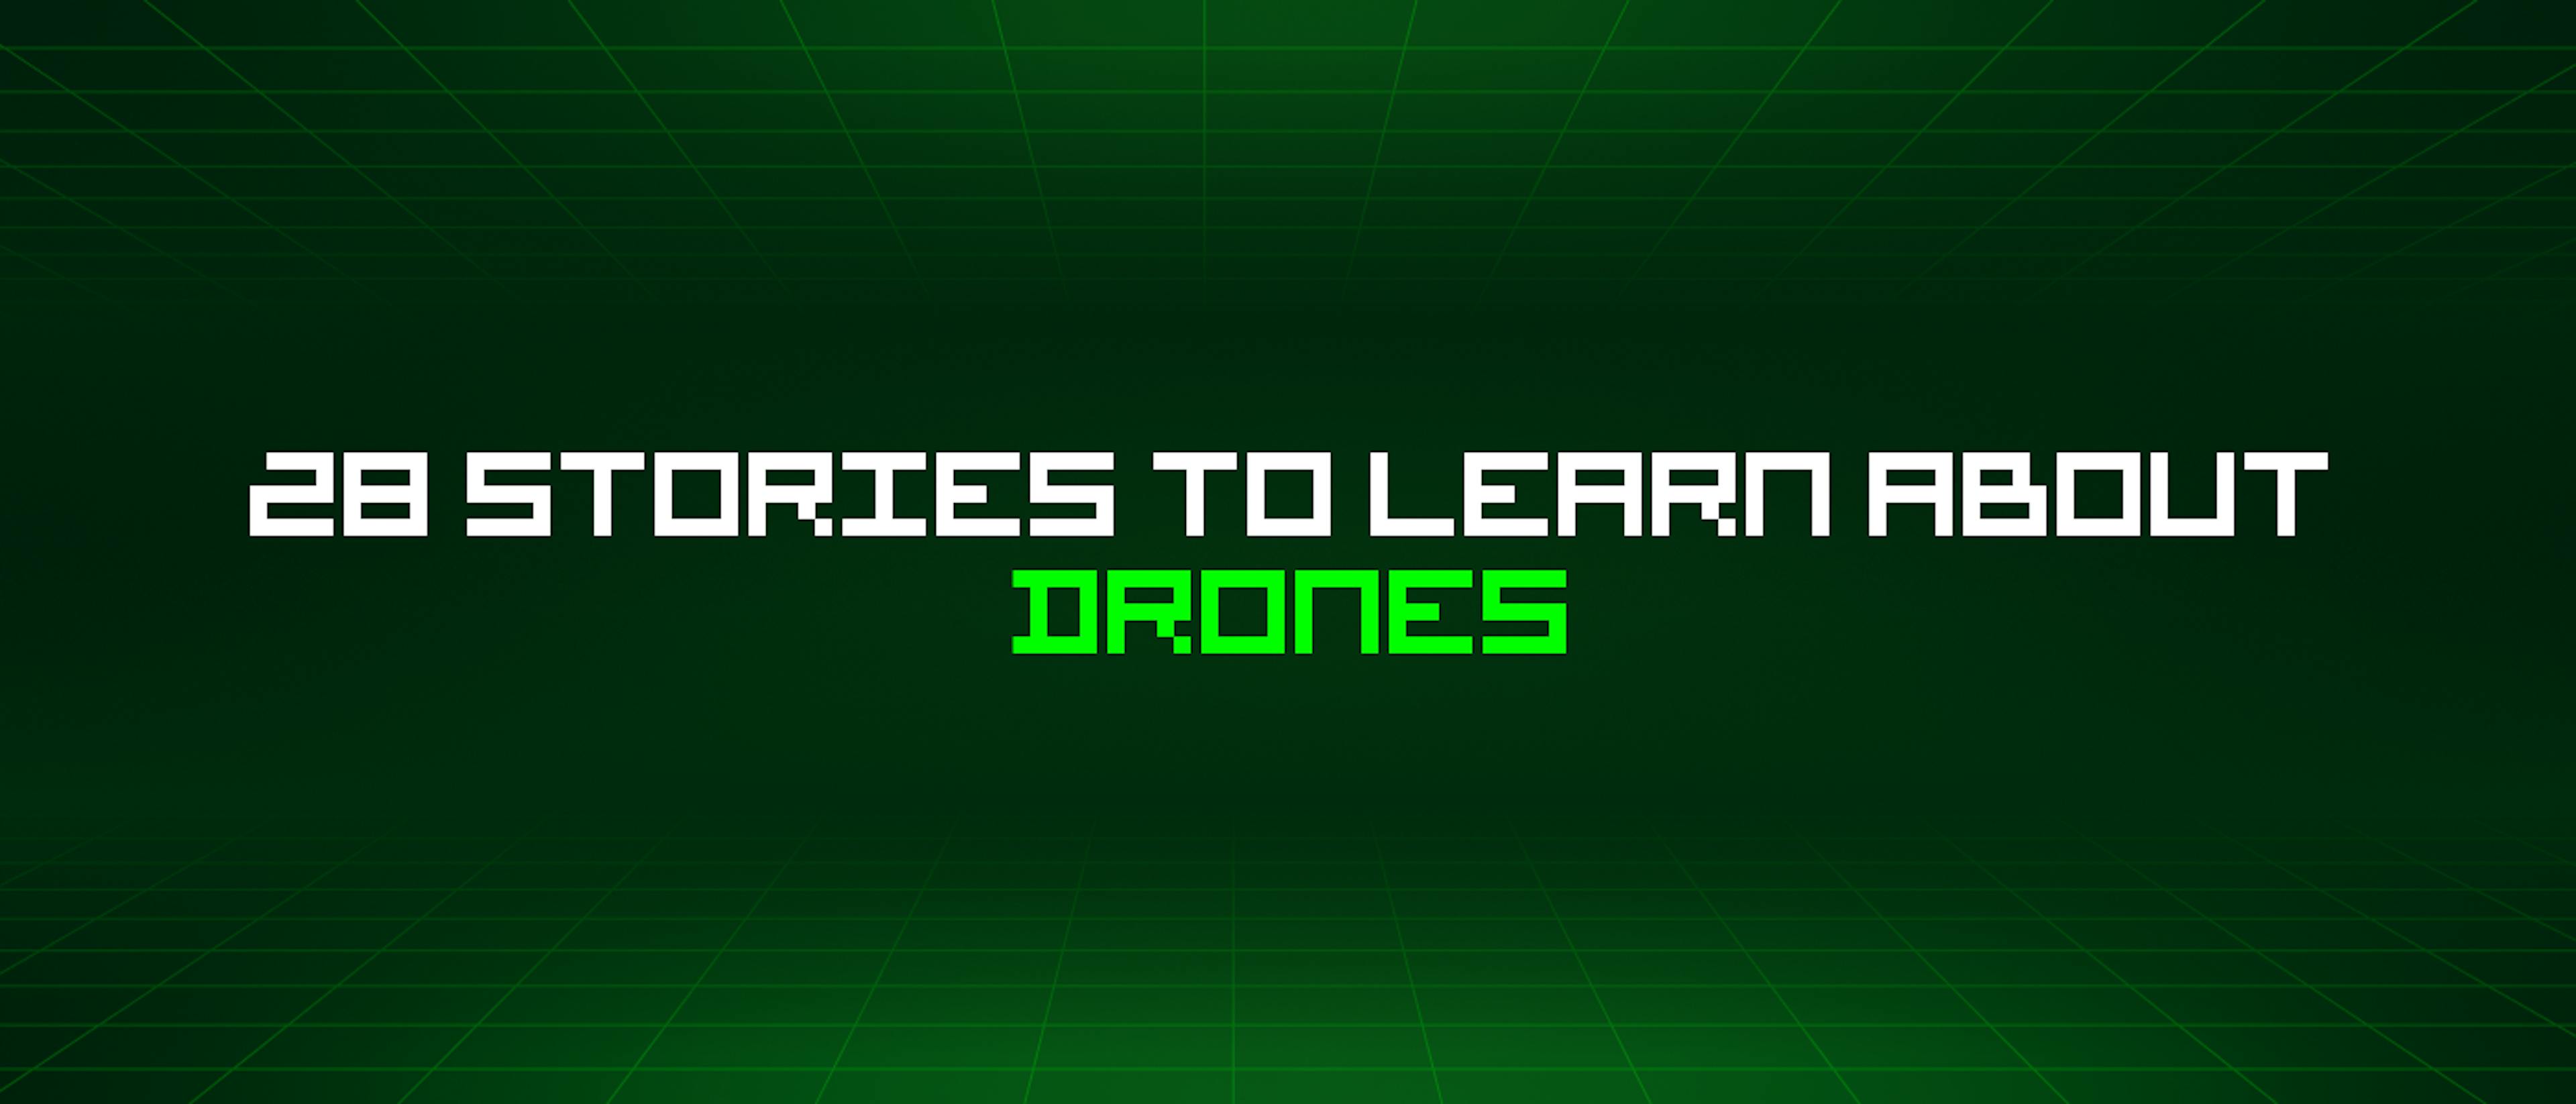 featured image - 28 Stories To Learn About Drones